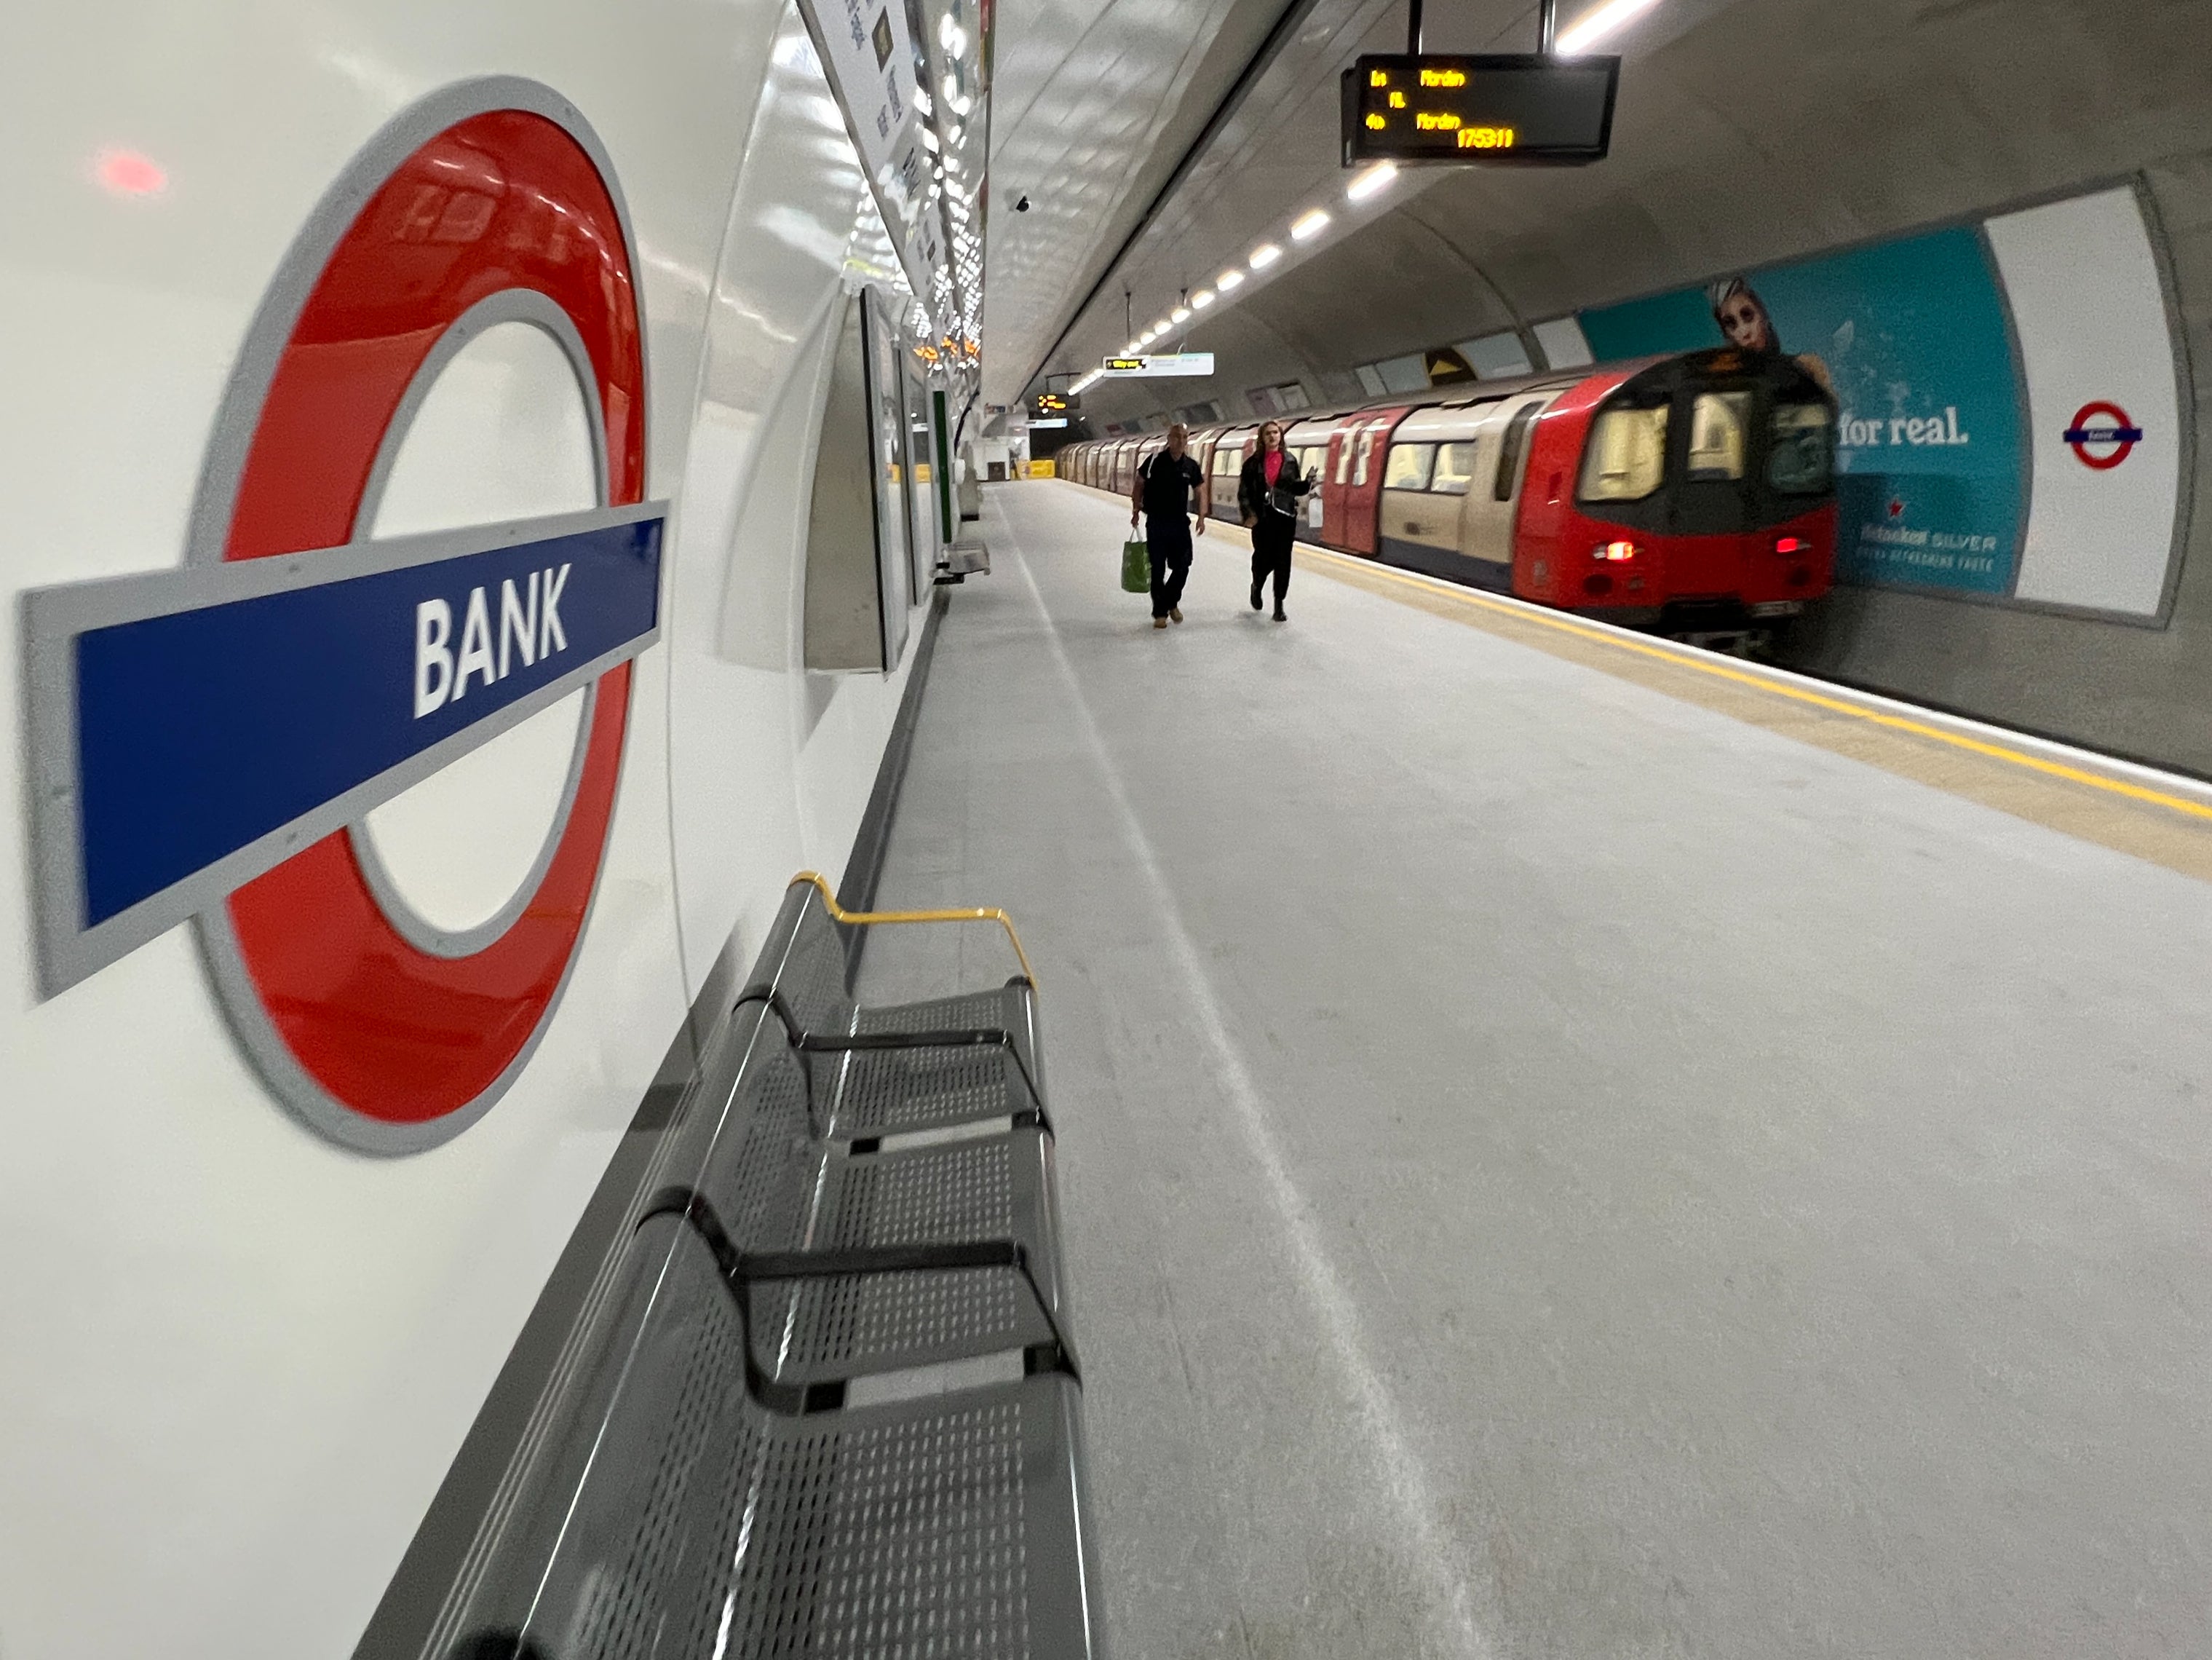 Space age: the southbound platform at Bank station in London